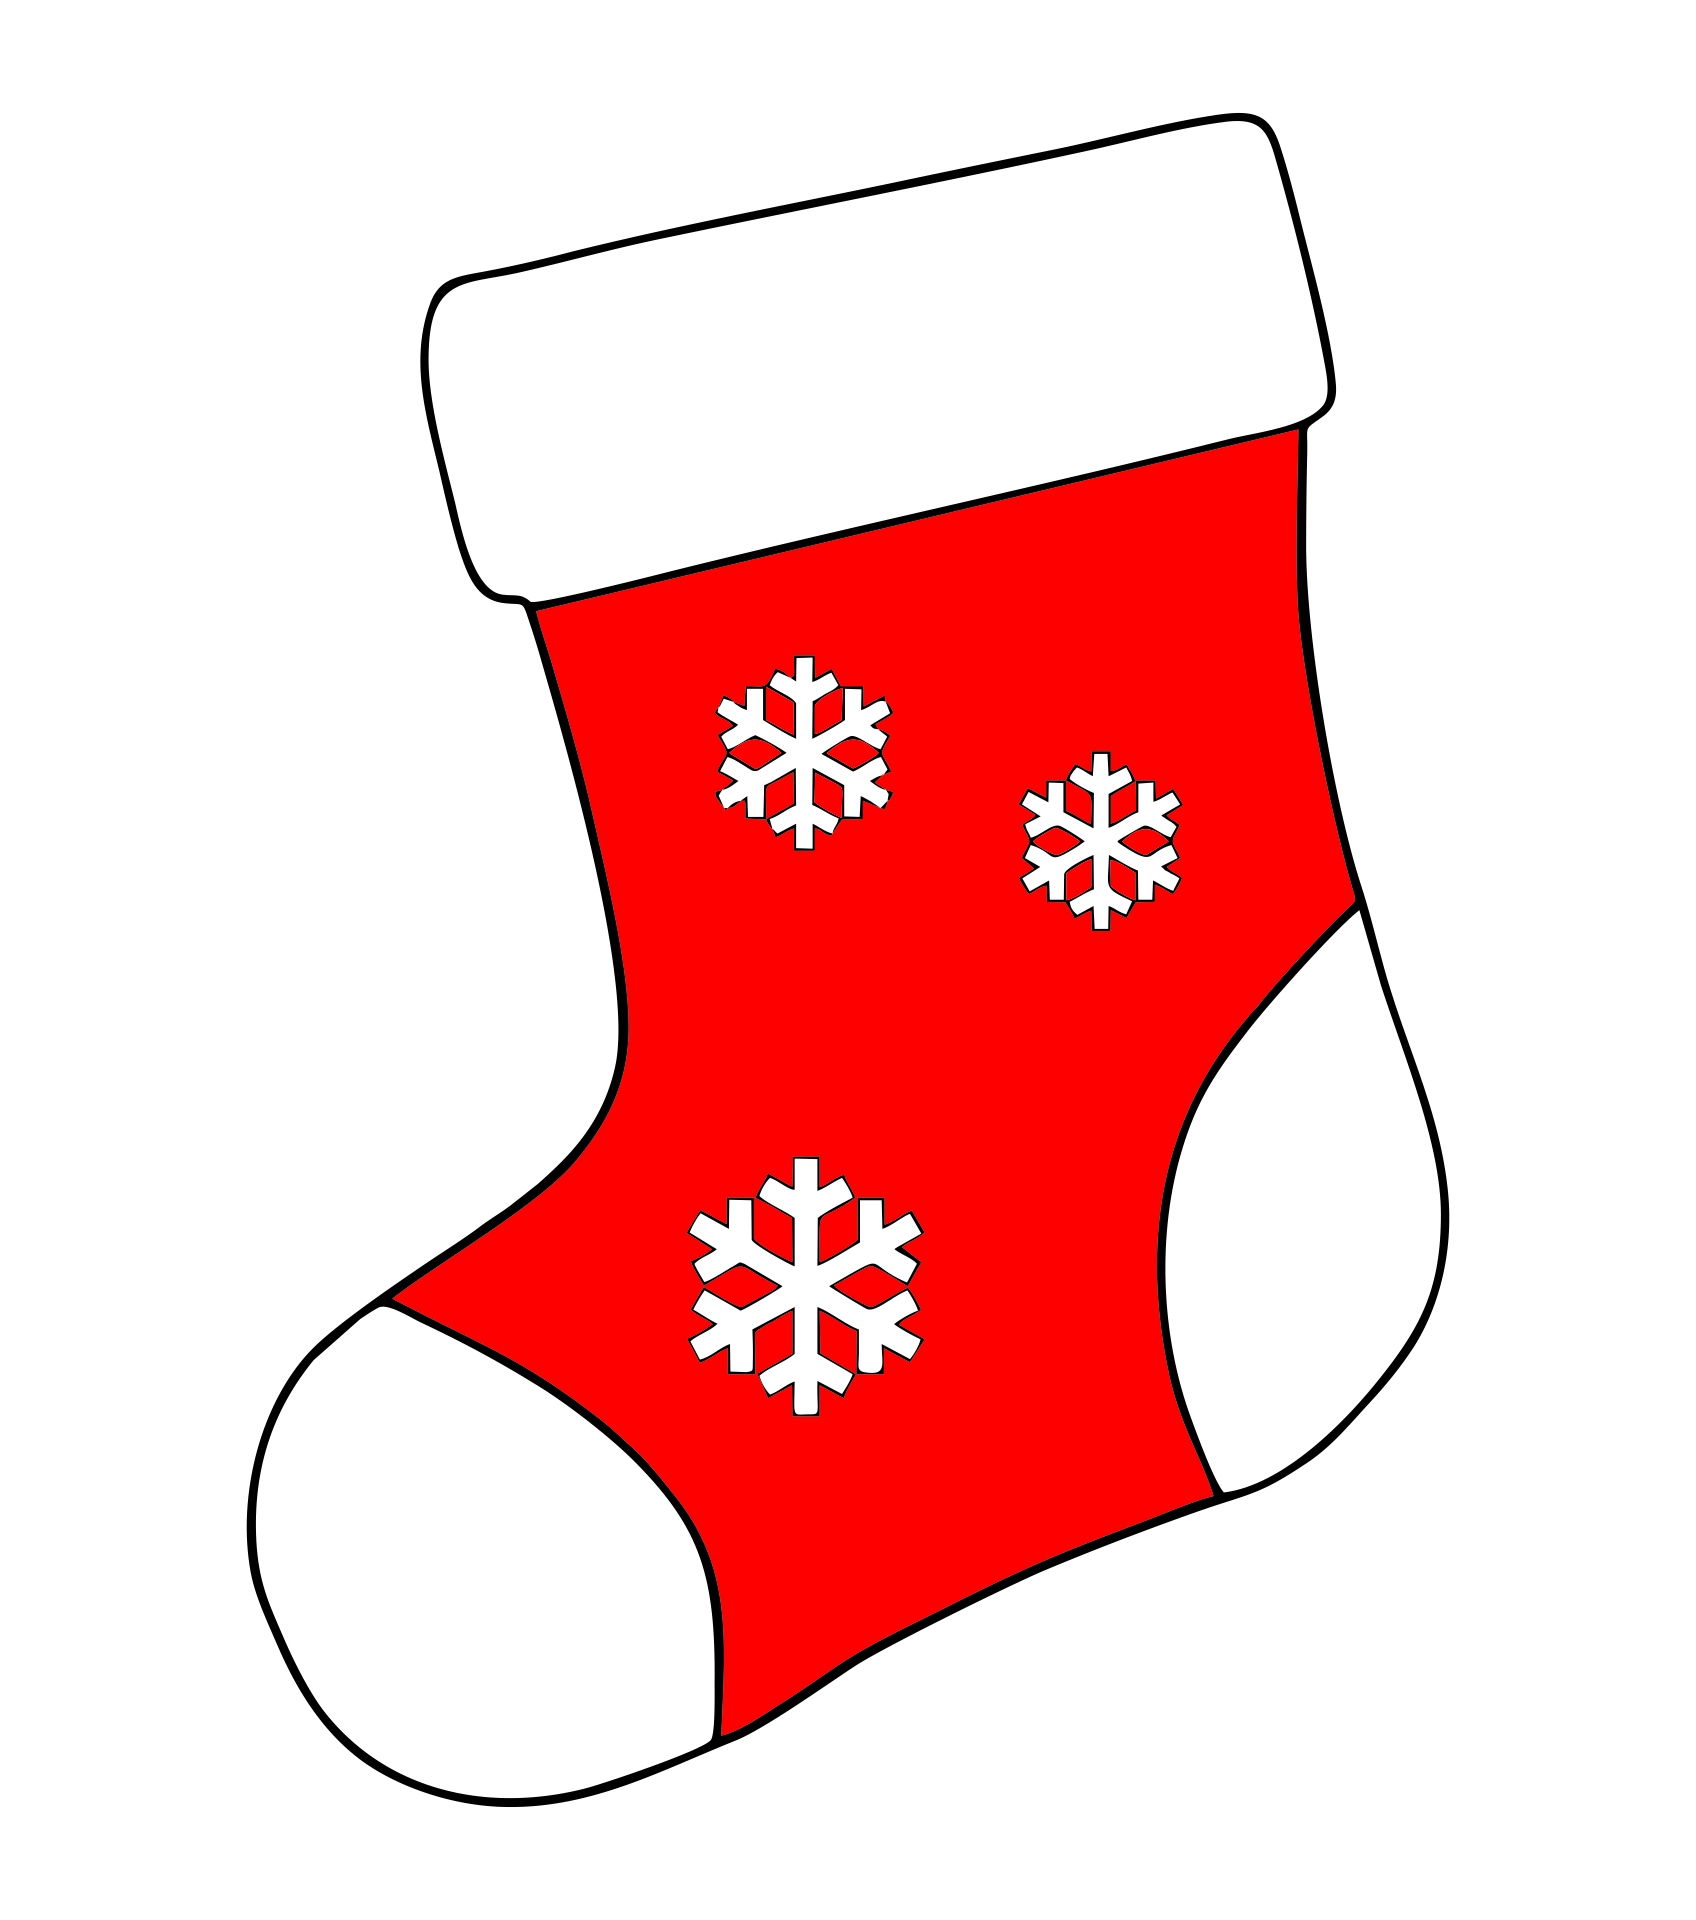 template-print-free-printable-christmas-stocking-pattern-web-this-stocking-template-can-be-used